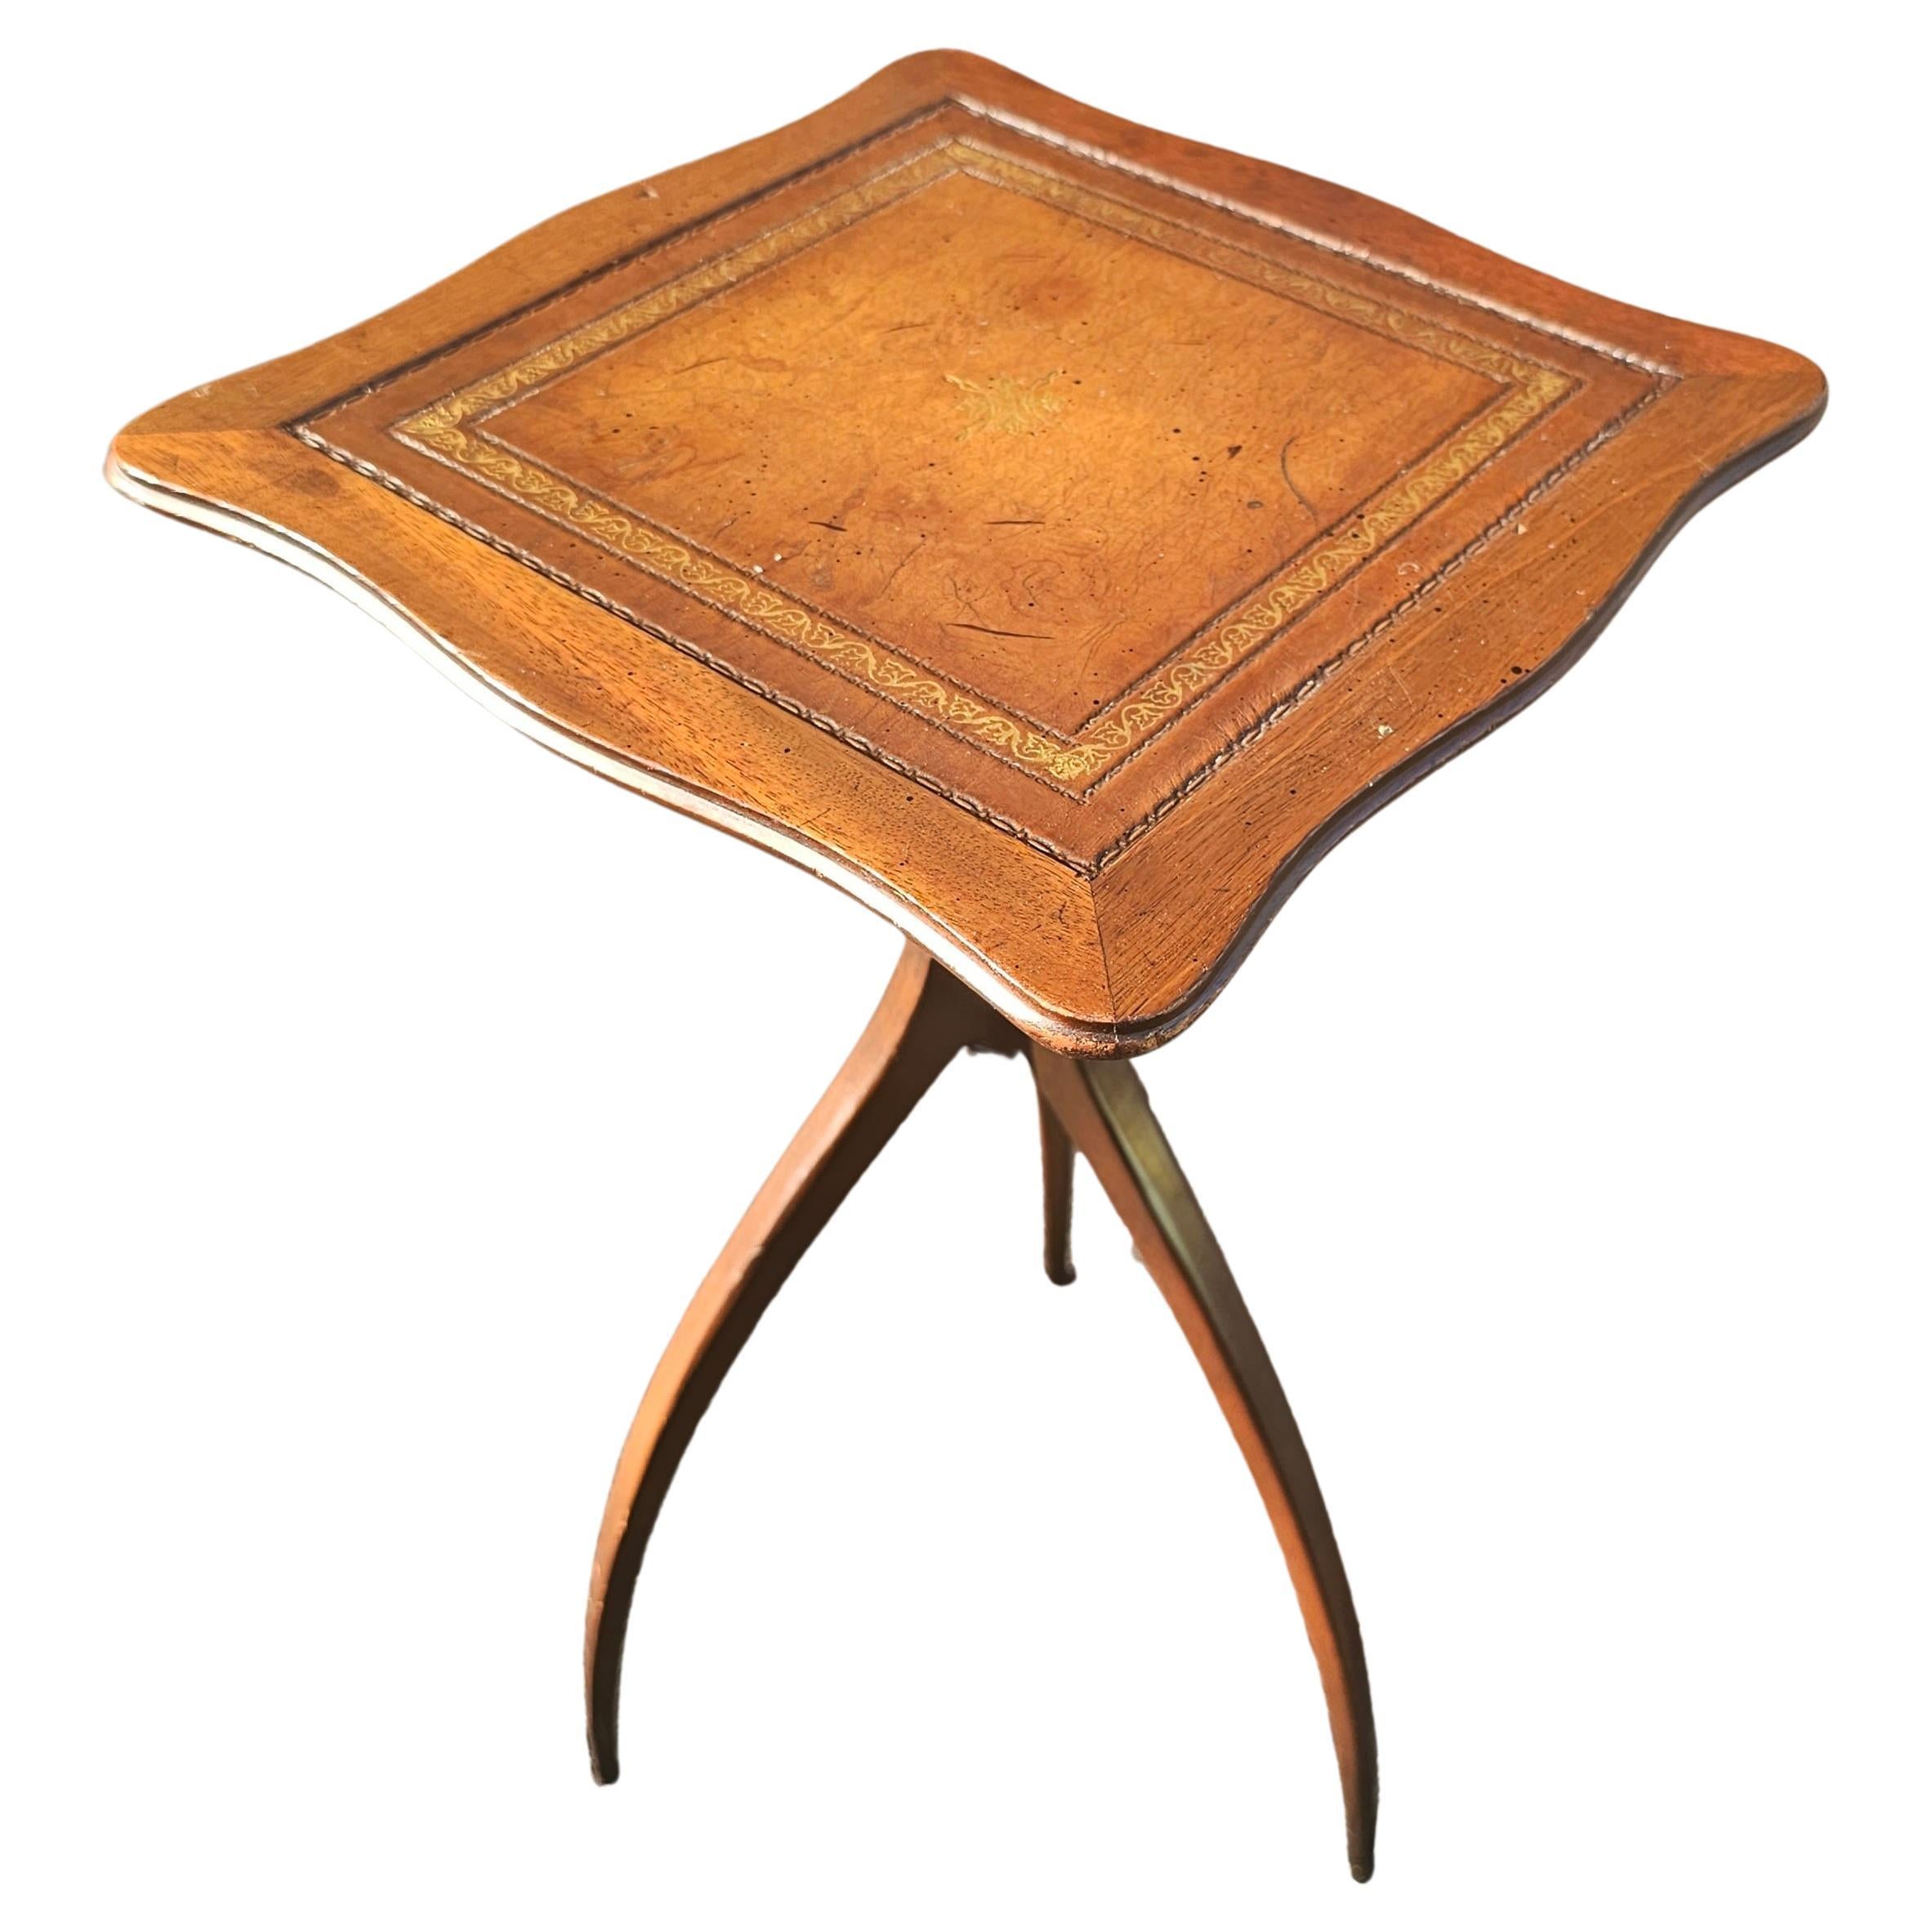 Mid 20th Century Spider Tripod Mahogany and Tooled Leather Top Candle Stand In Good Condition For Sale In Germantown, MD